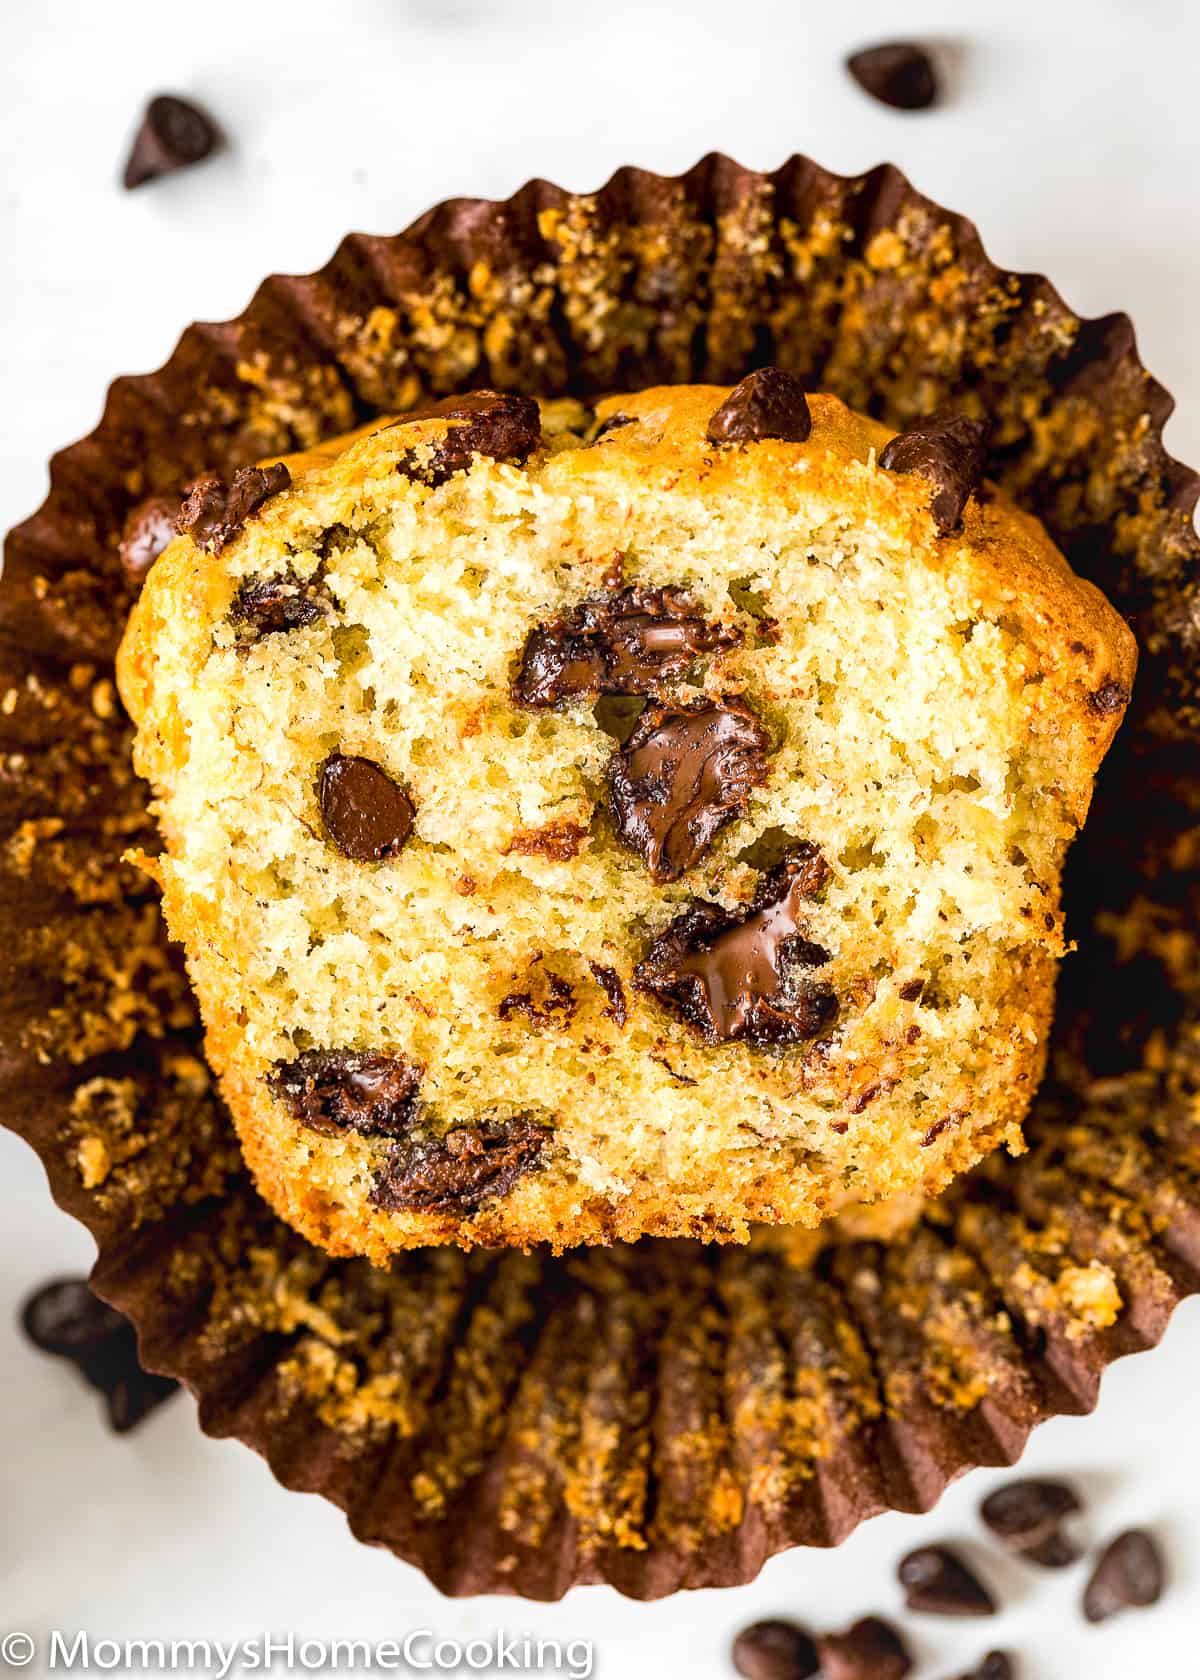 one Eggless Banana Chocolate Chip Muffin showing interior perfect texture.